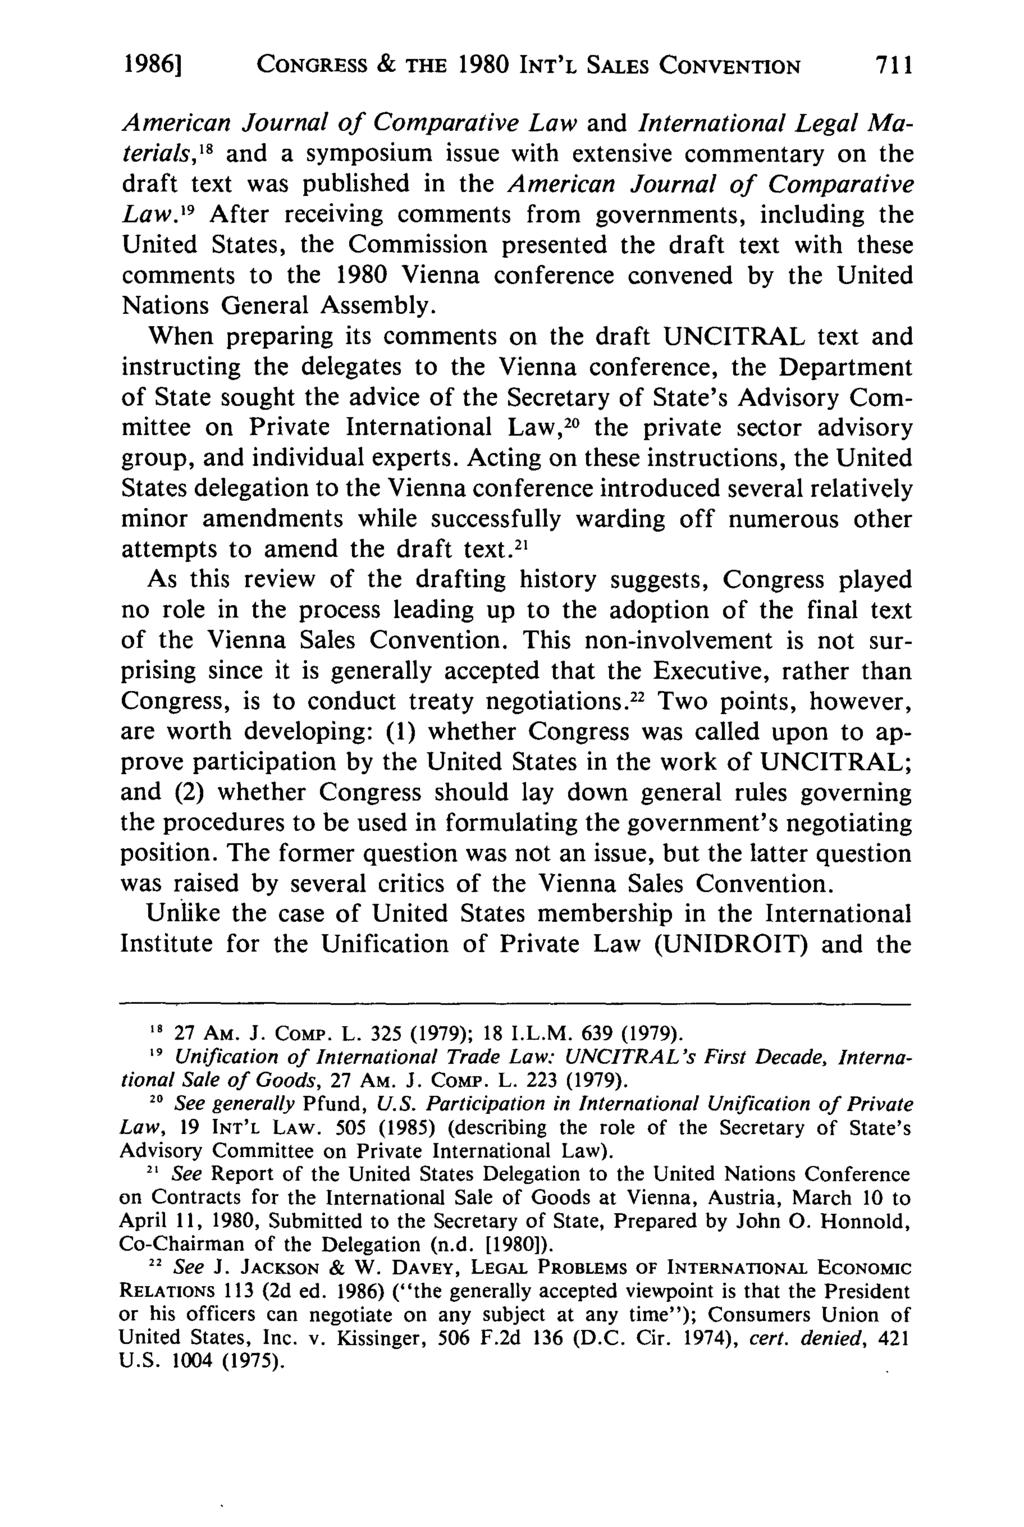 19861 CONGRESS & THE 1980 INT'L SALES CONVENTION American Journal of Comparative Law and International Legal Materials, 18 and a symposium issue with extensive commentary on the draft text was